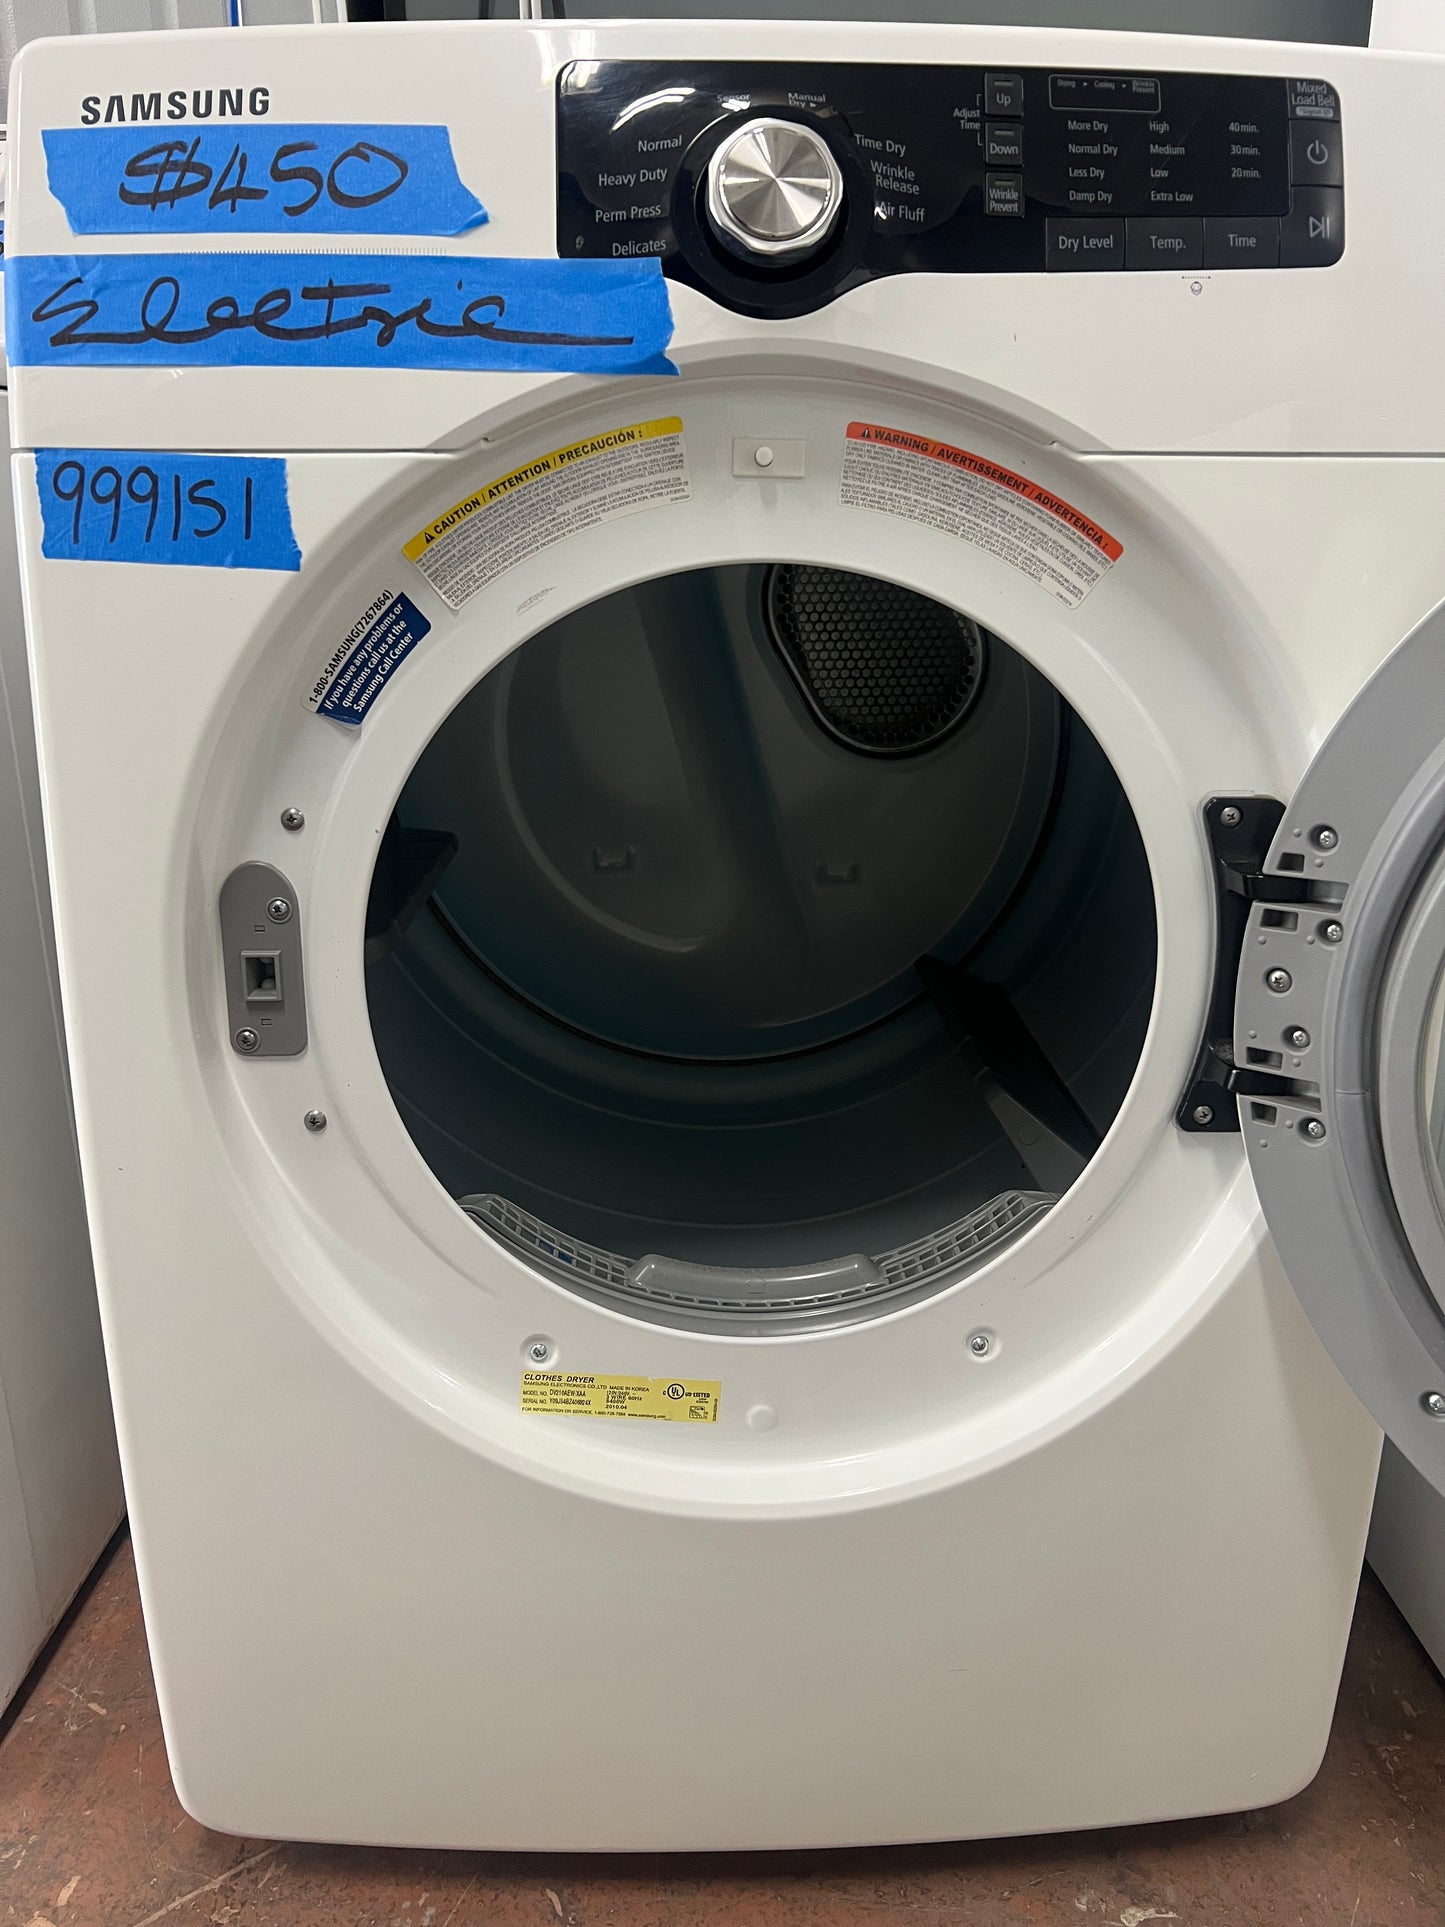 Samsung Front Load Electric Dryer in White 999151